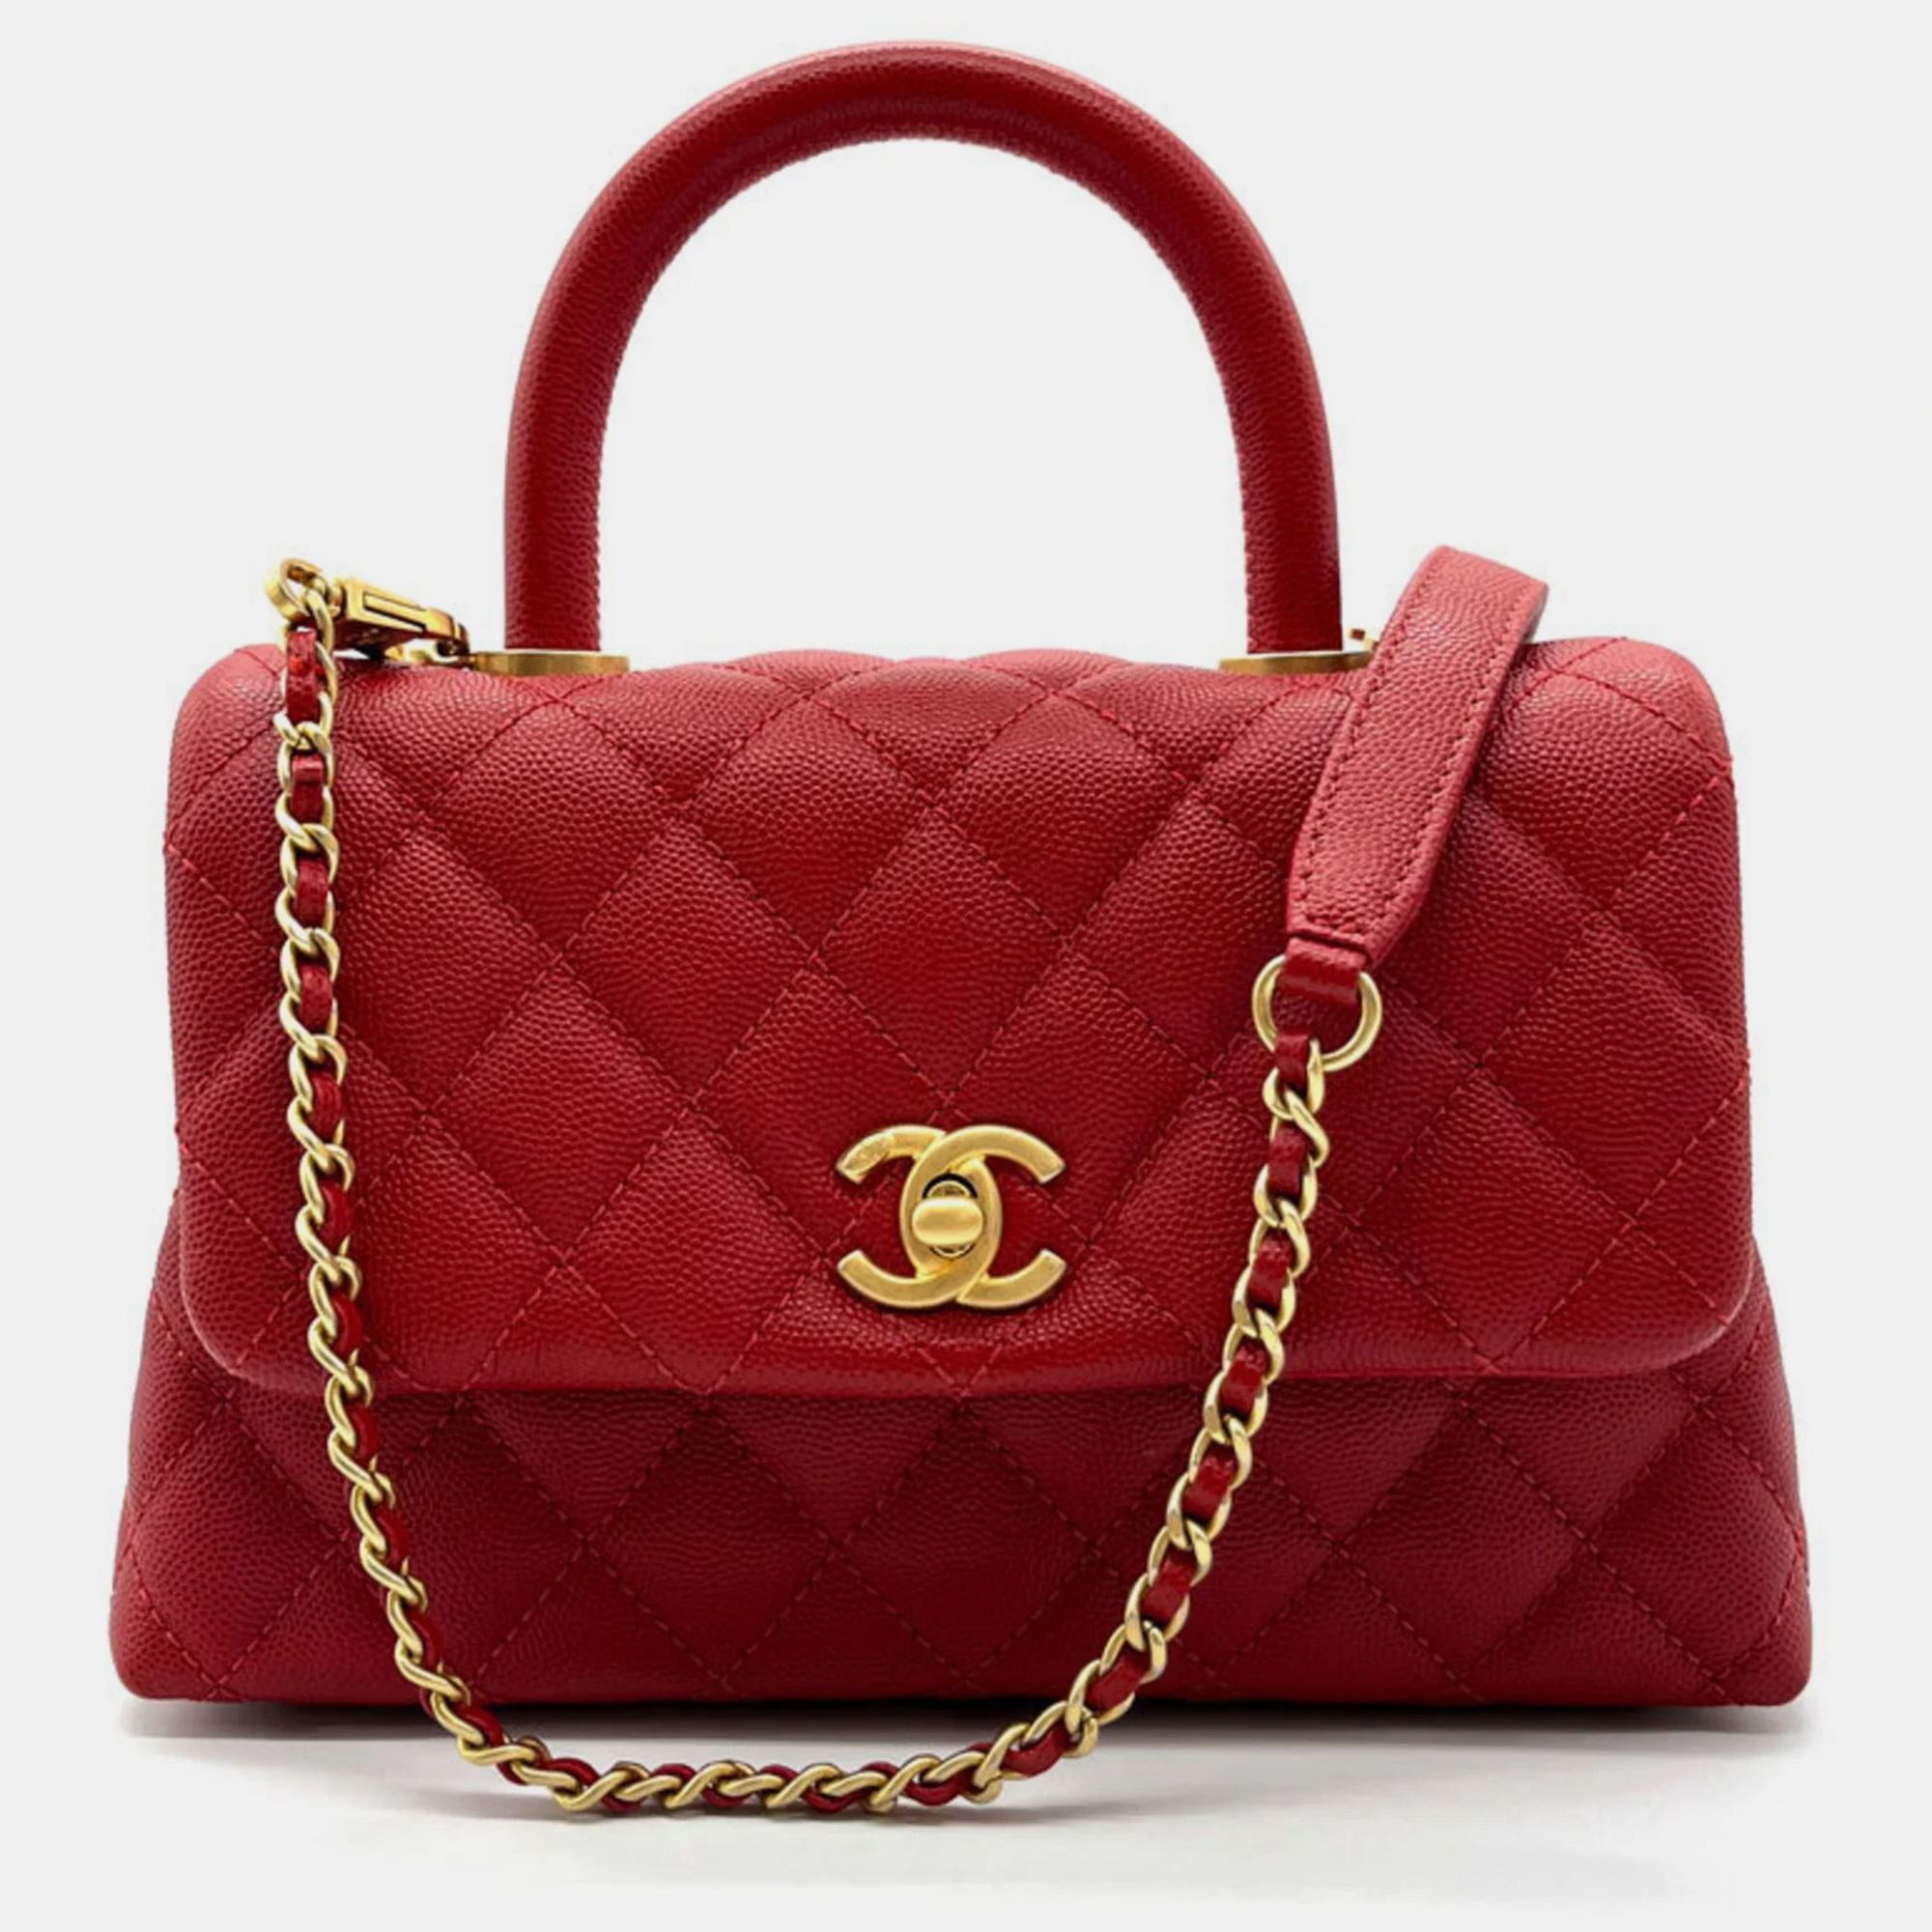 Chanel red leather small coco handle top handle bag